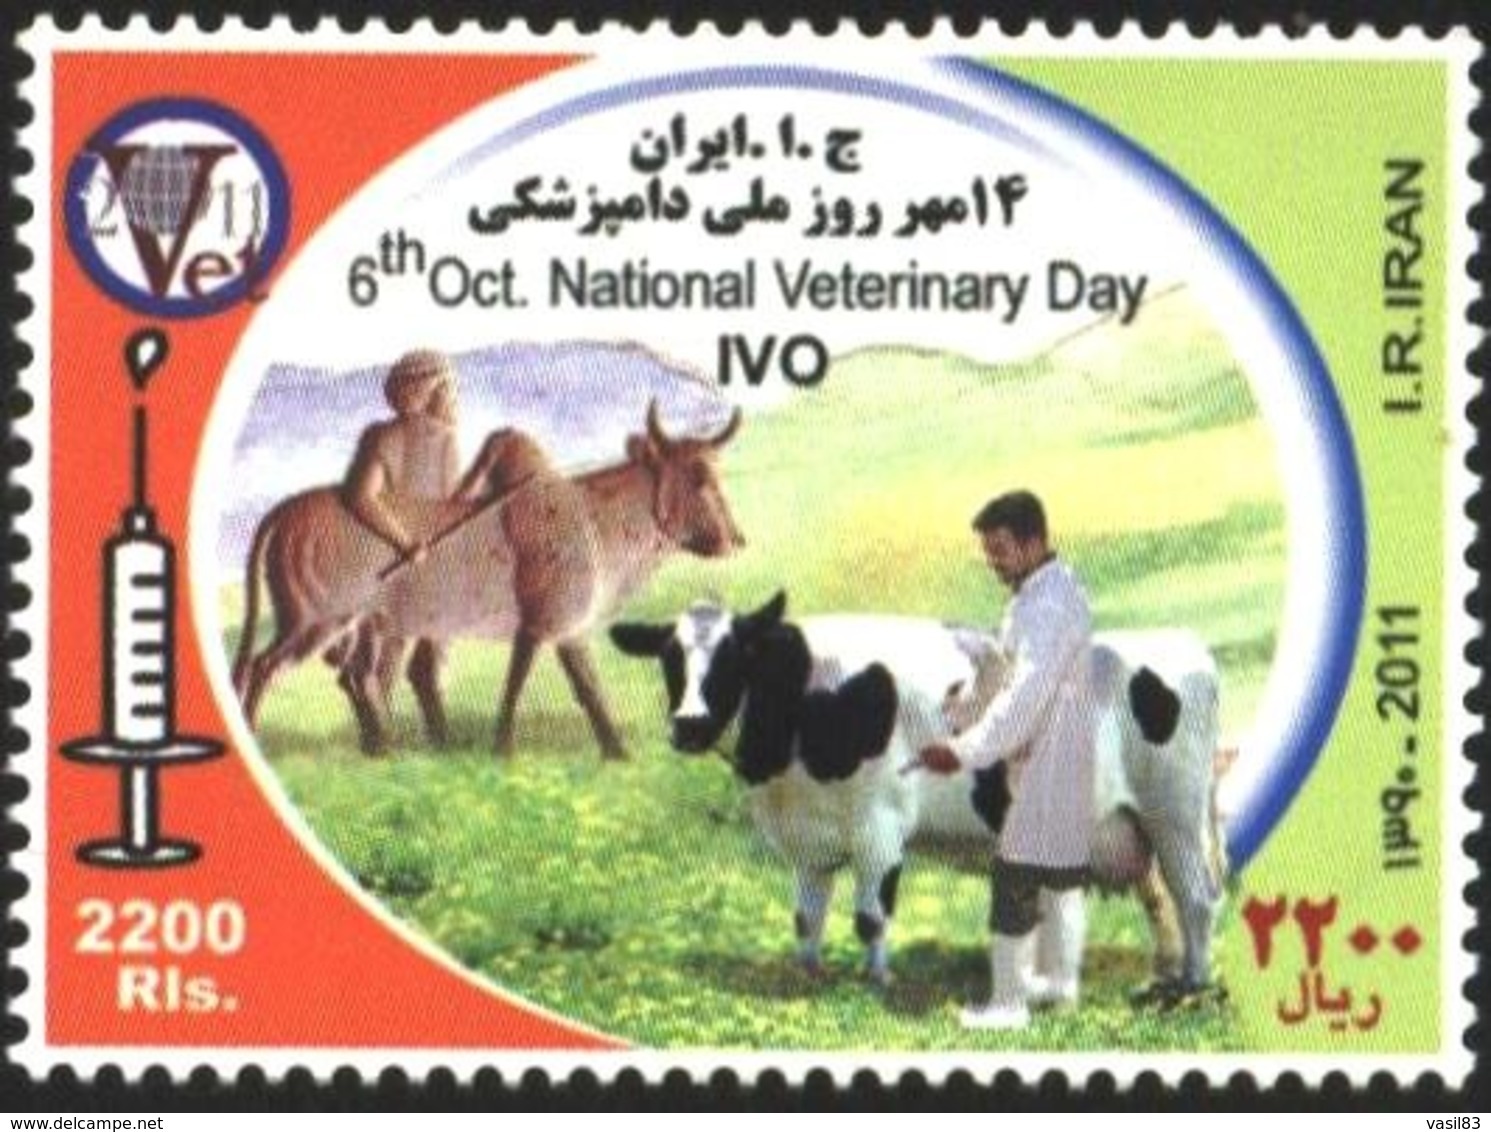 Mint Stamp National Veterinary Day 2011 From Iran - Farm